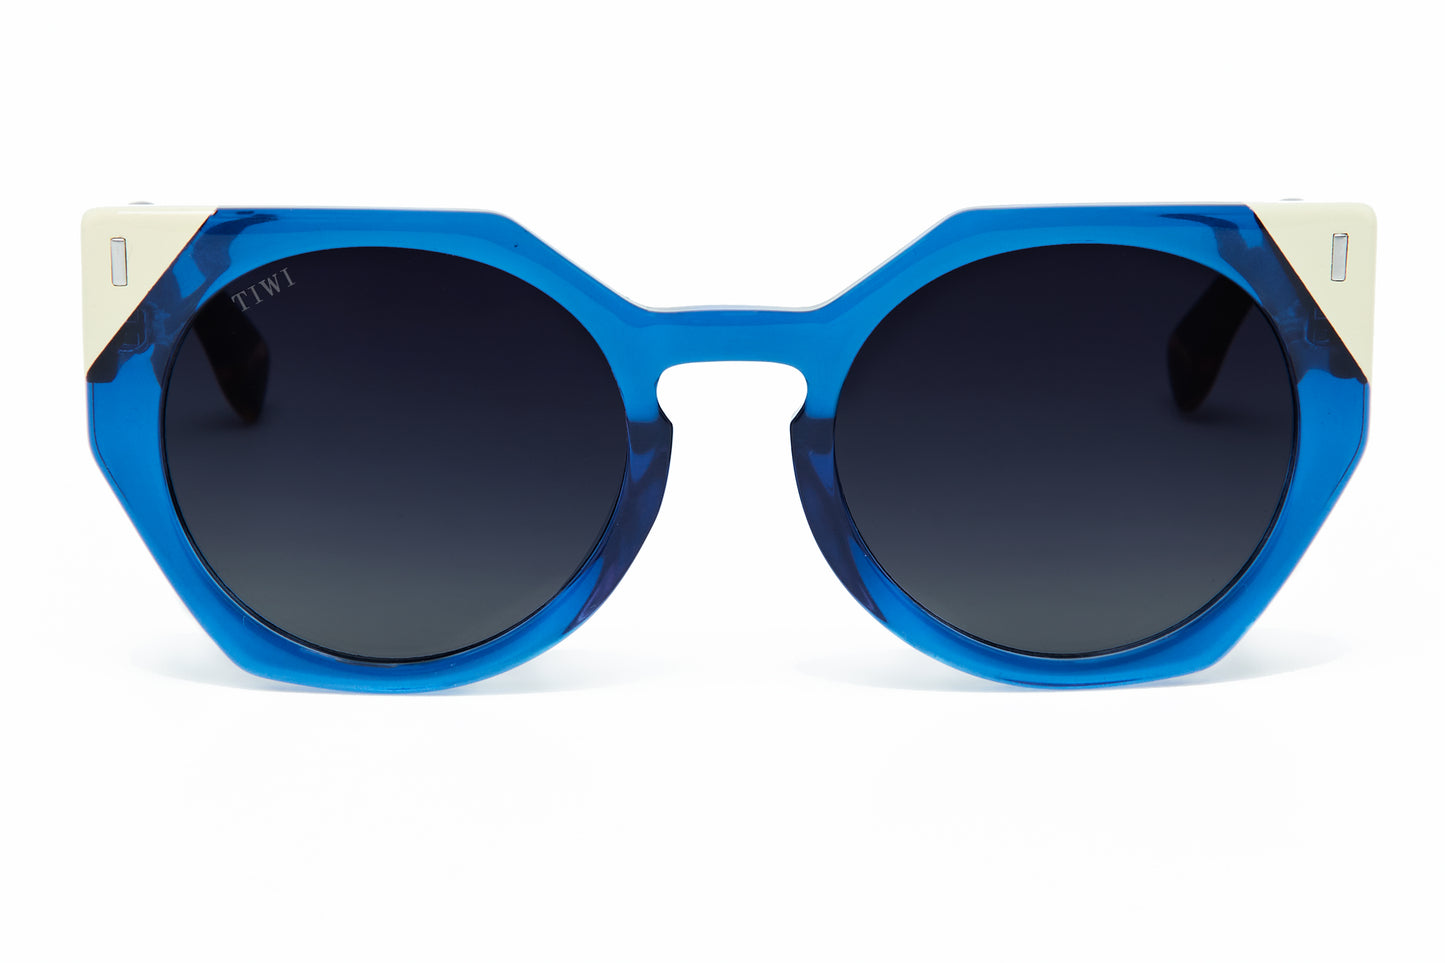 VENUS Sunglasses Available in more colors Shiny Dark Blue/Beige with Blue Gradient Lenses  